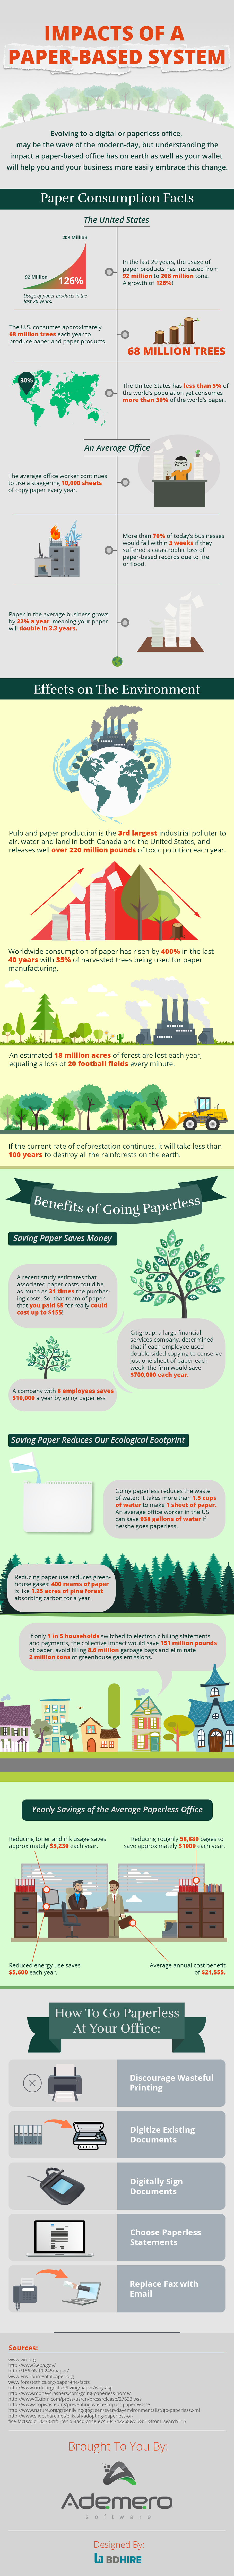 Impacts-of-a-Paper-Based-System